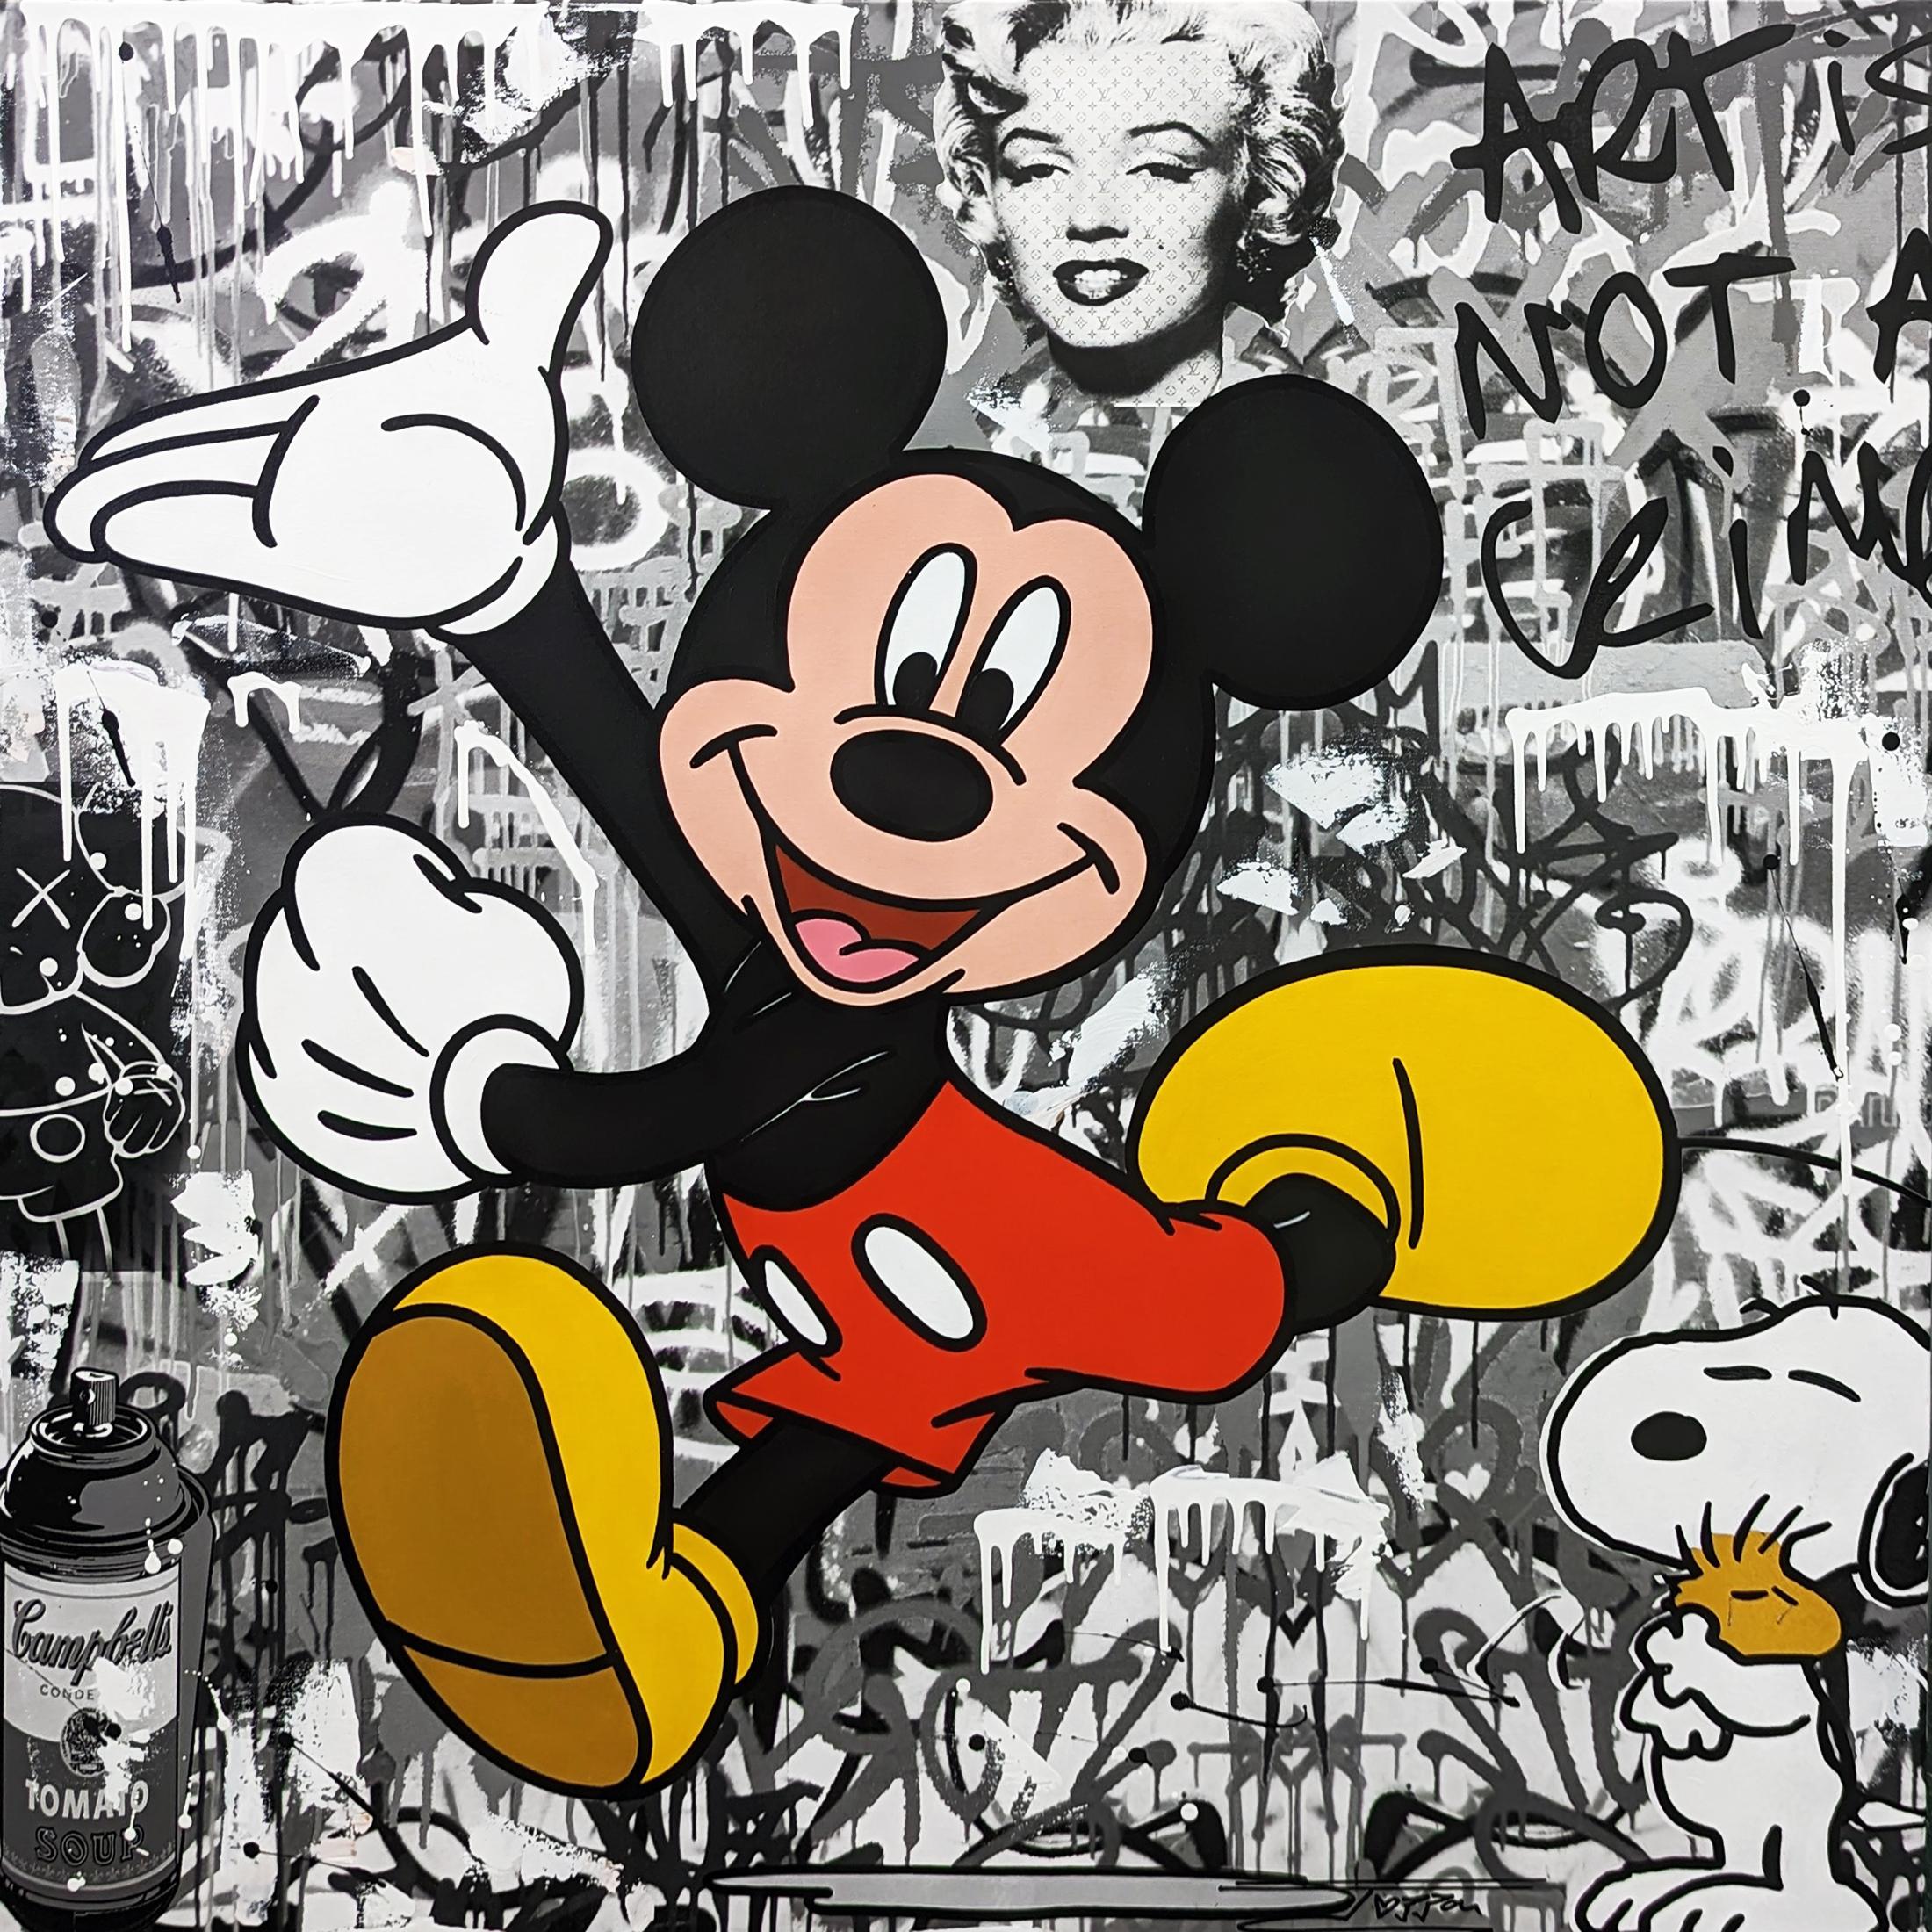 Jozza Portrait Painting - NOT A CRIME! (MICKEY MOUSE)